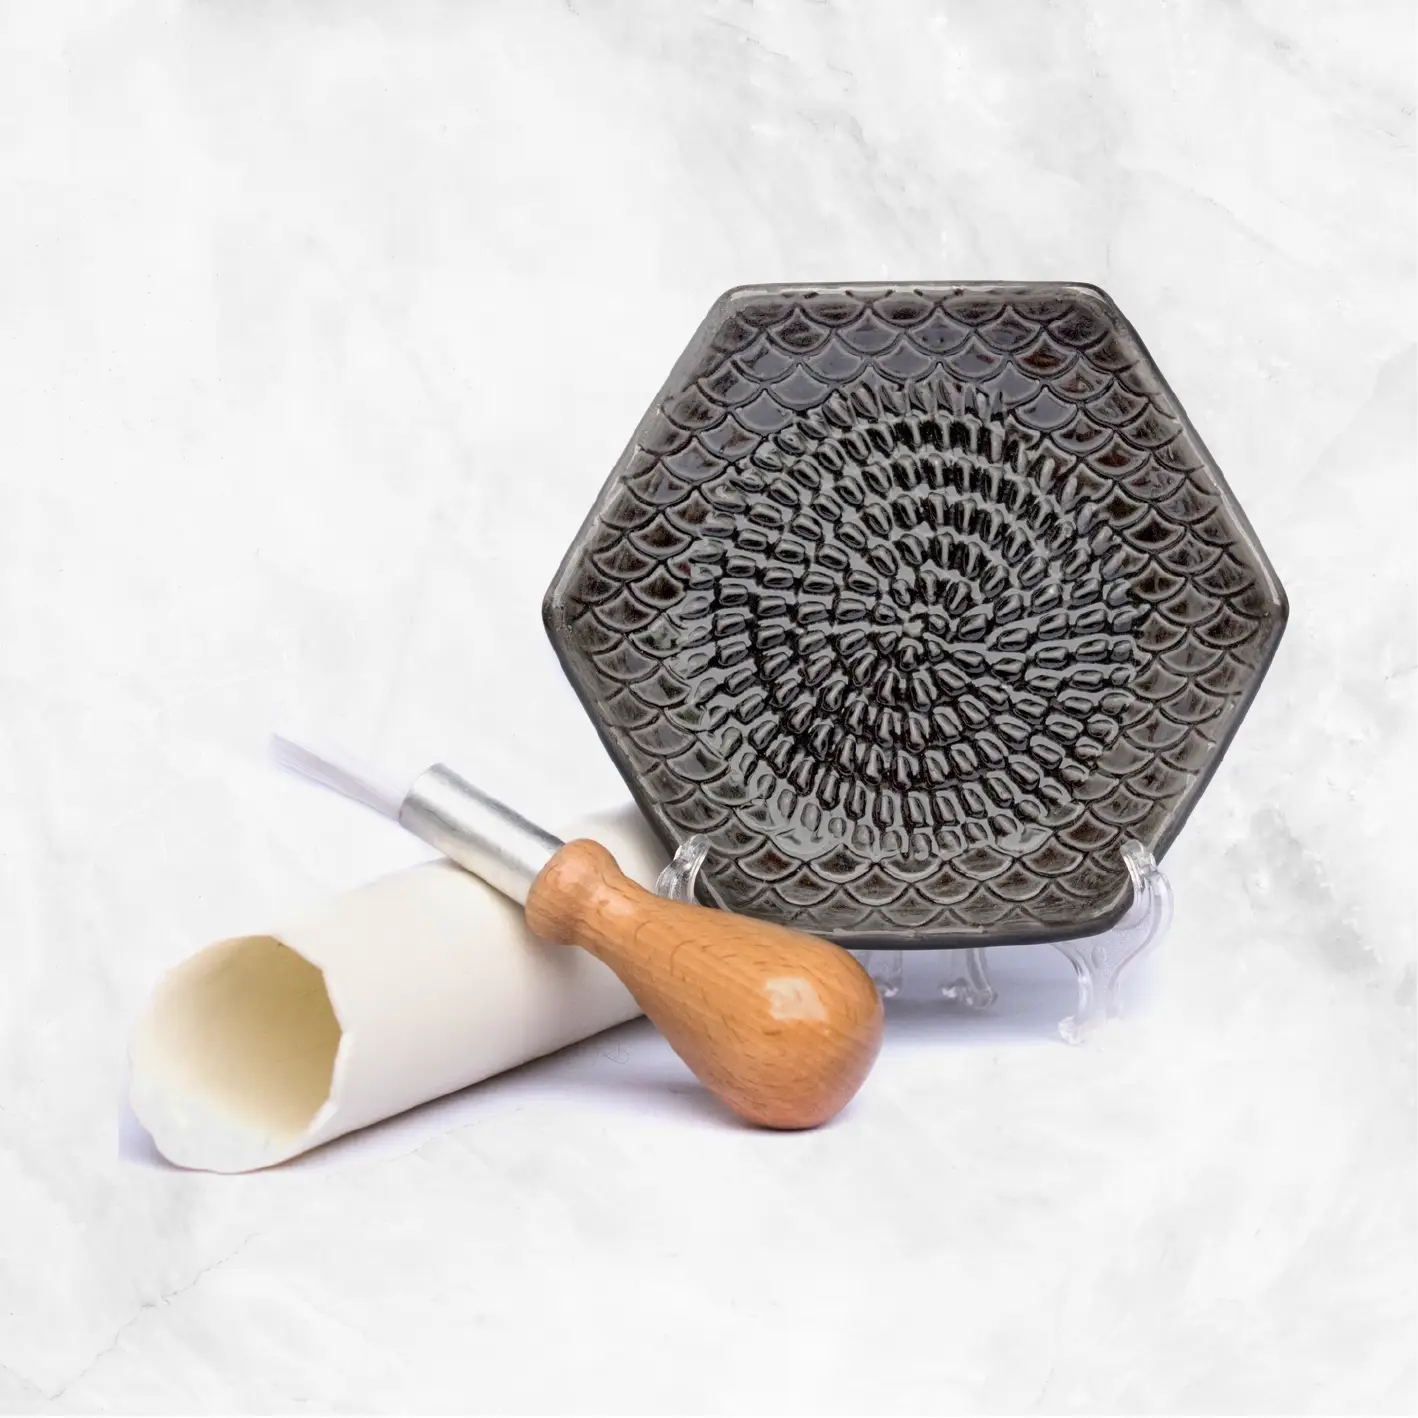 Charcoal 3 Piece Set: Ceramic Grater, Peeler, Brush Delivery